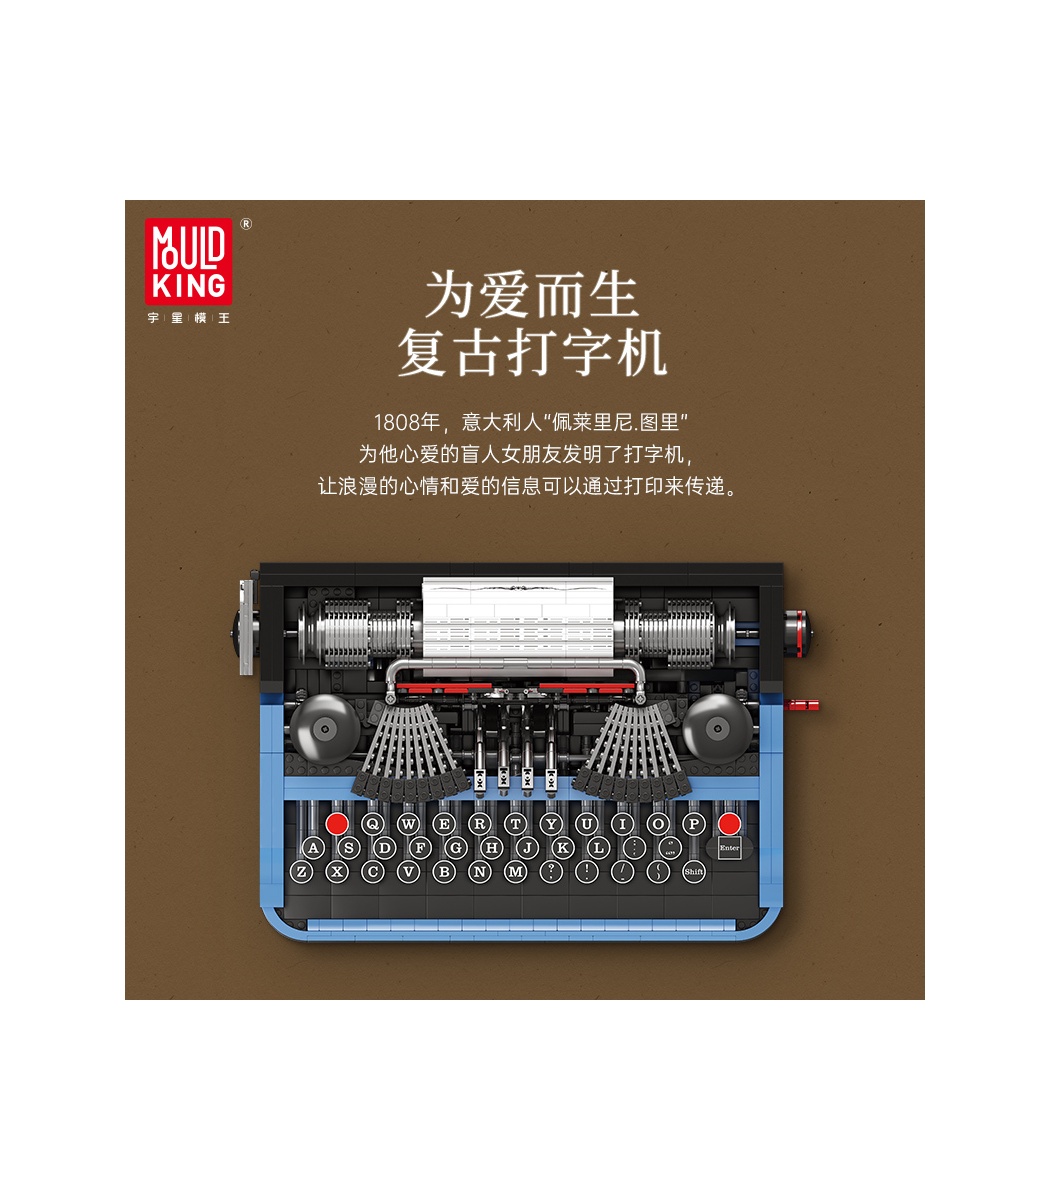 MOULD KING 10032 MOC Toys The Classic Retro Typewriter Model Building  Blocks Assembly Bricks As Kids